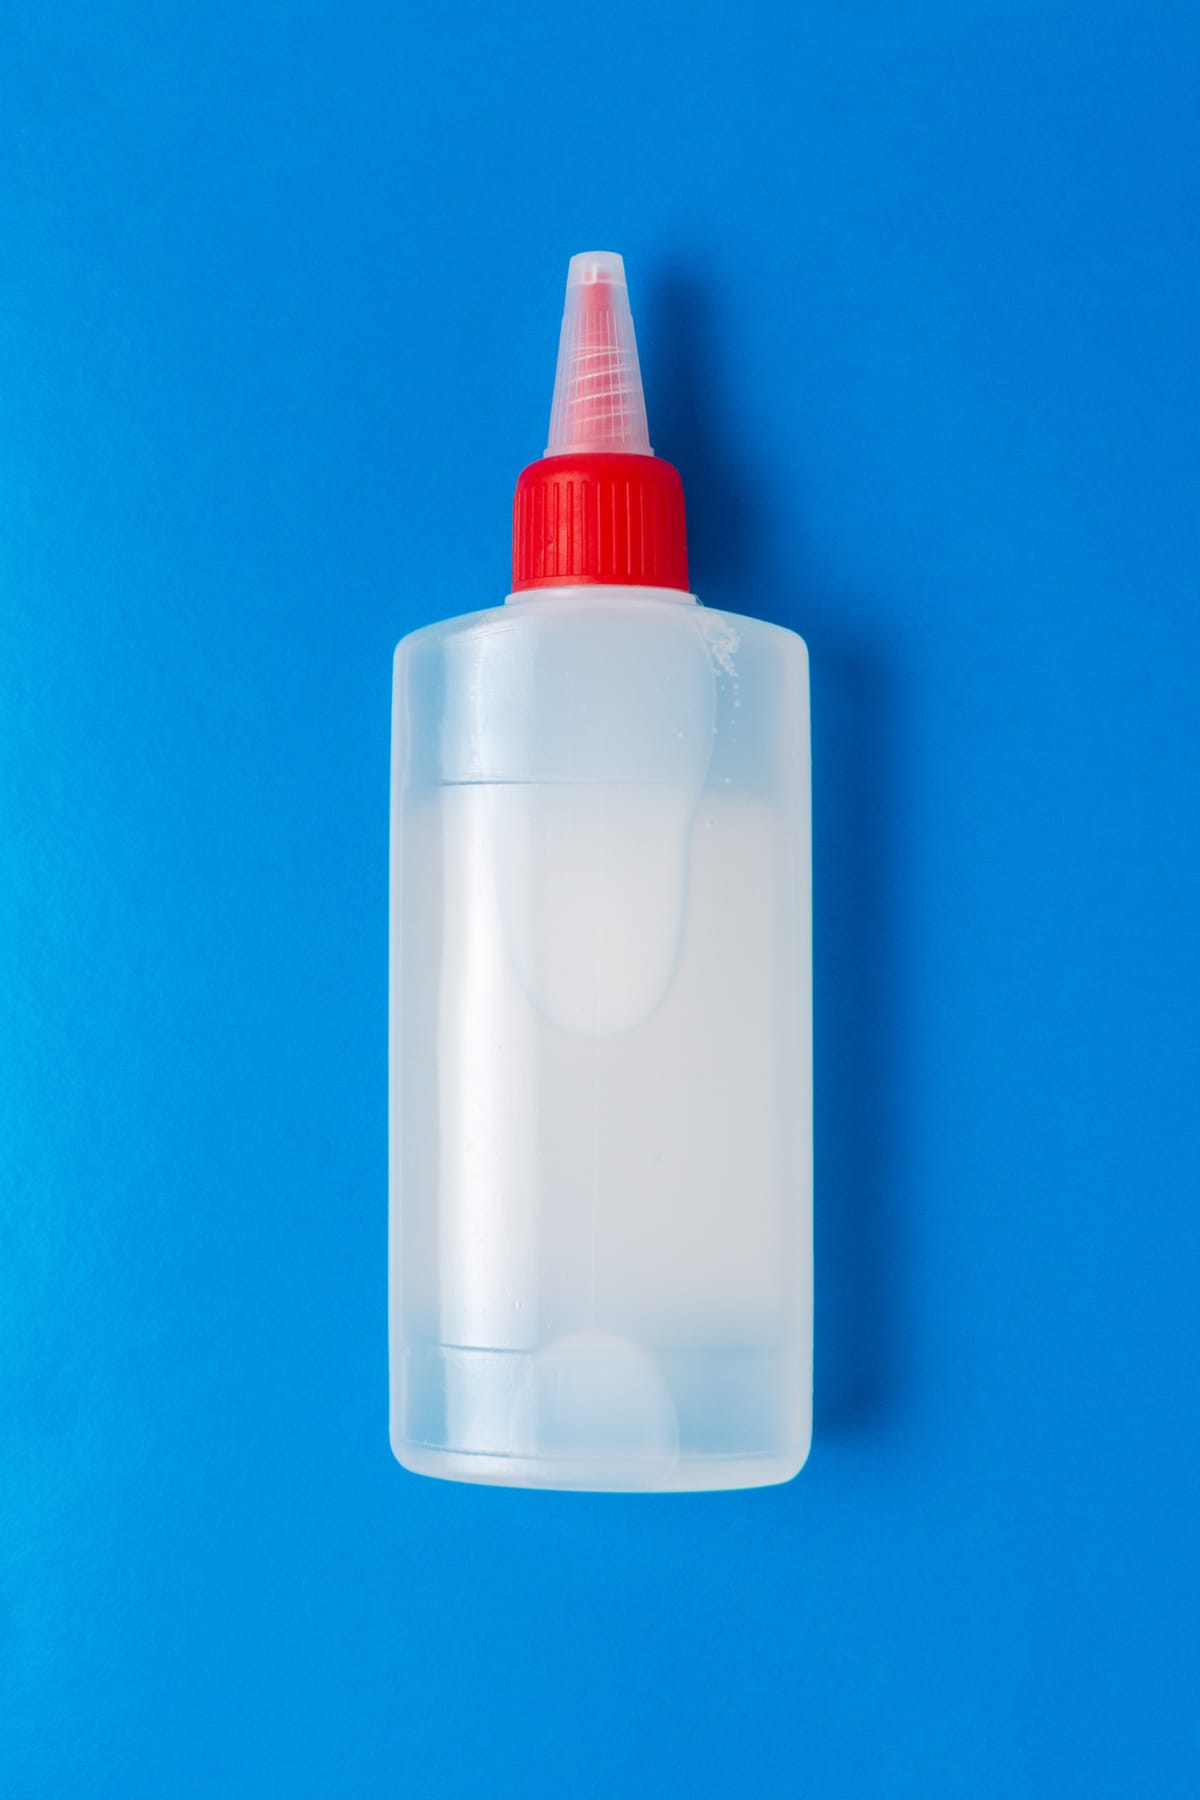 A bottle of glue isolated on a blue background